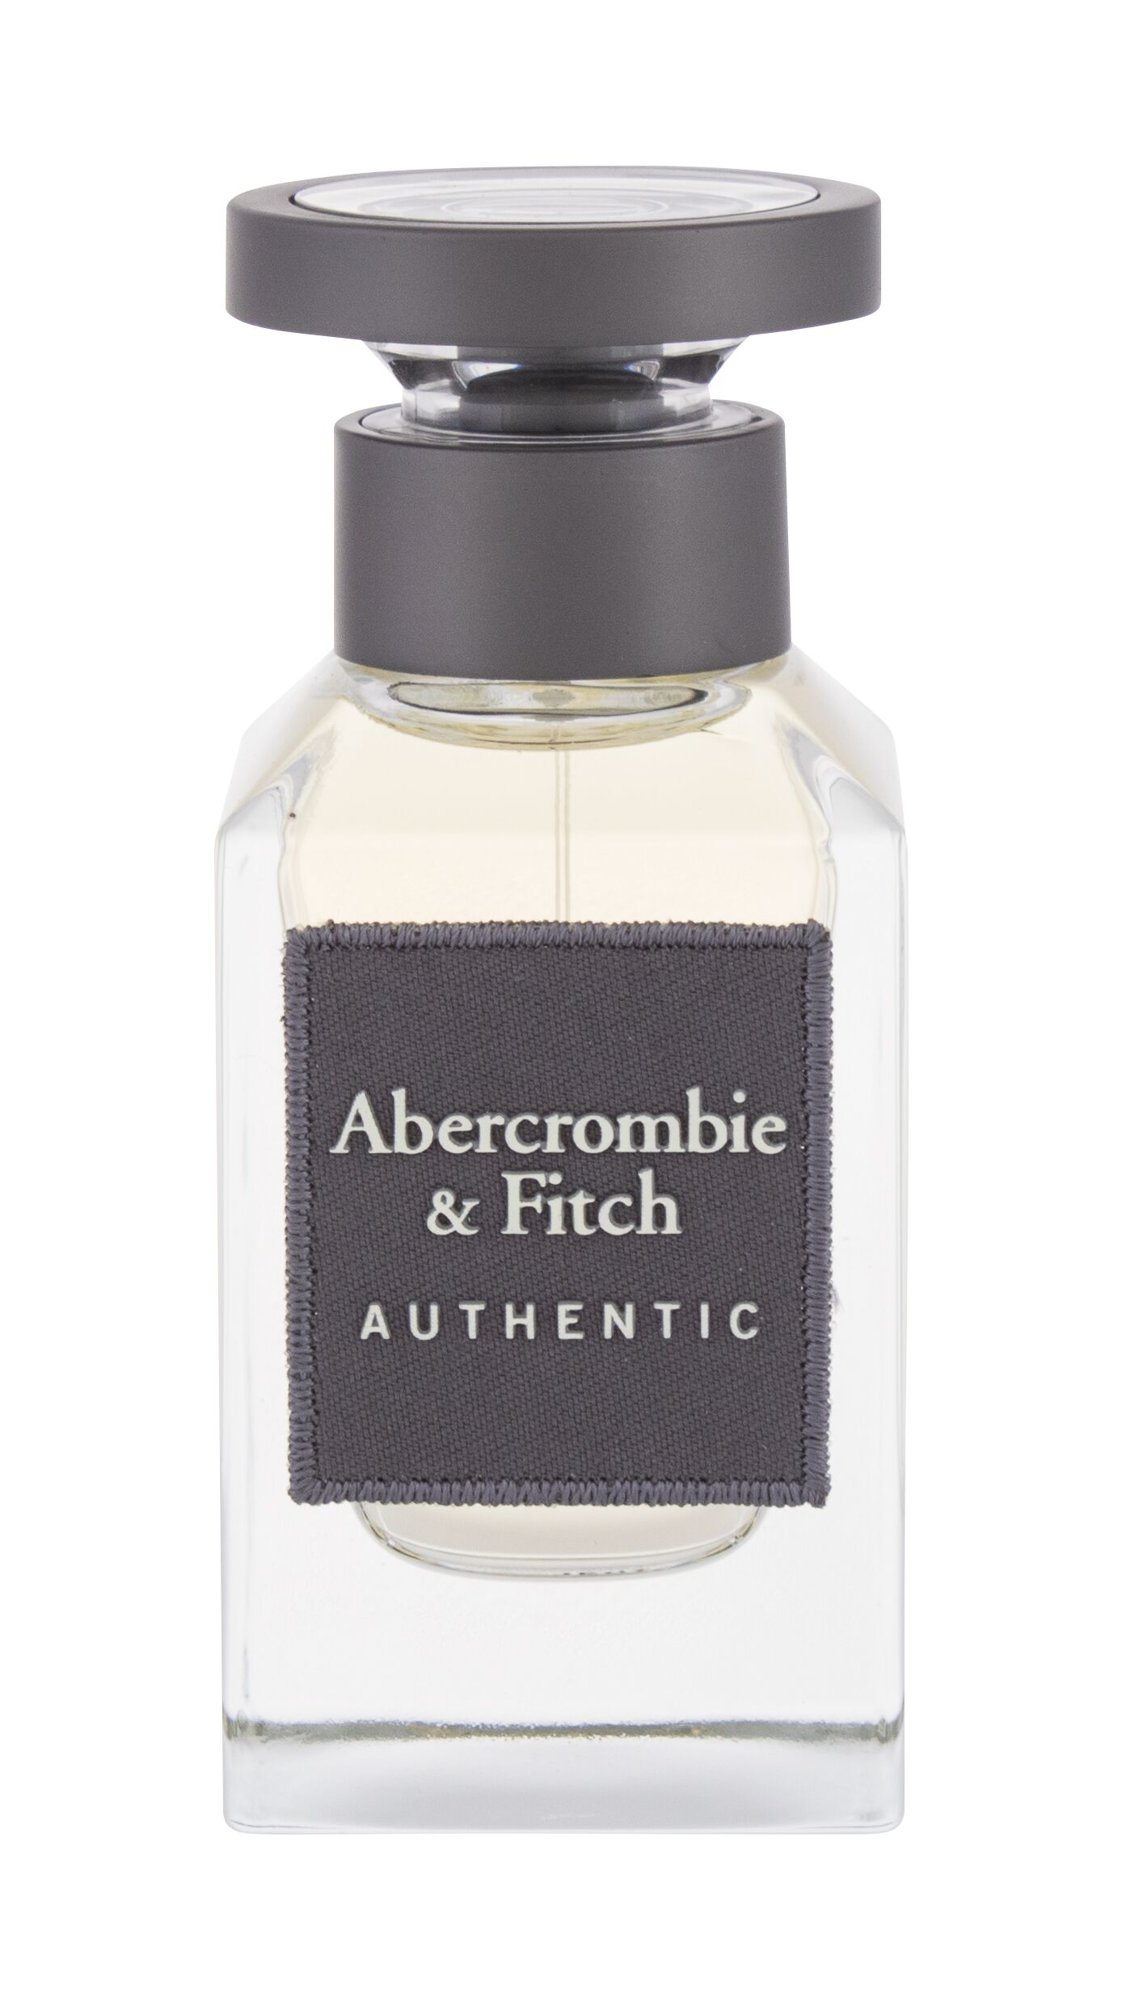 Abercrombie & Fitch Authentic, edt 50ml